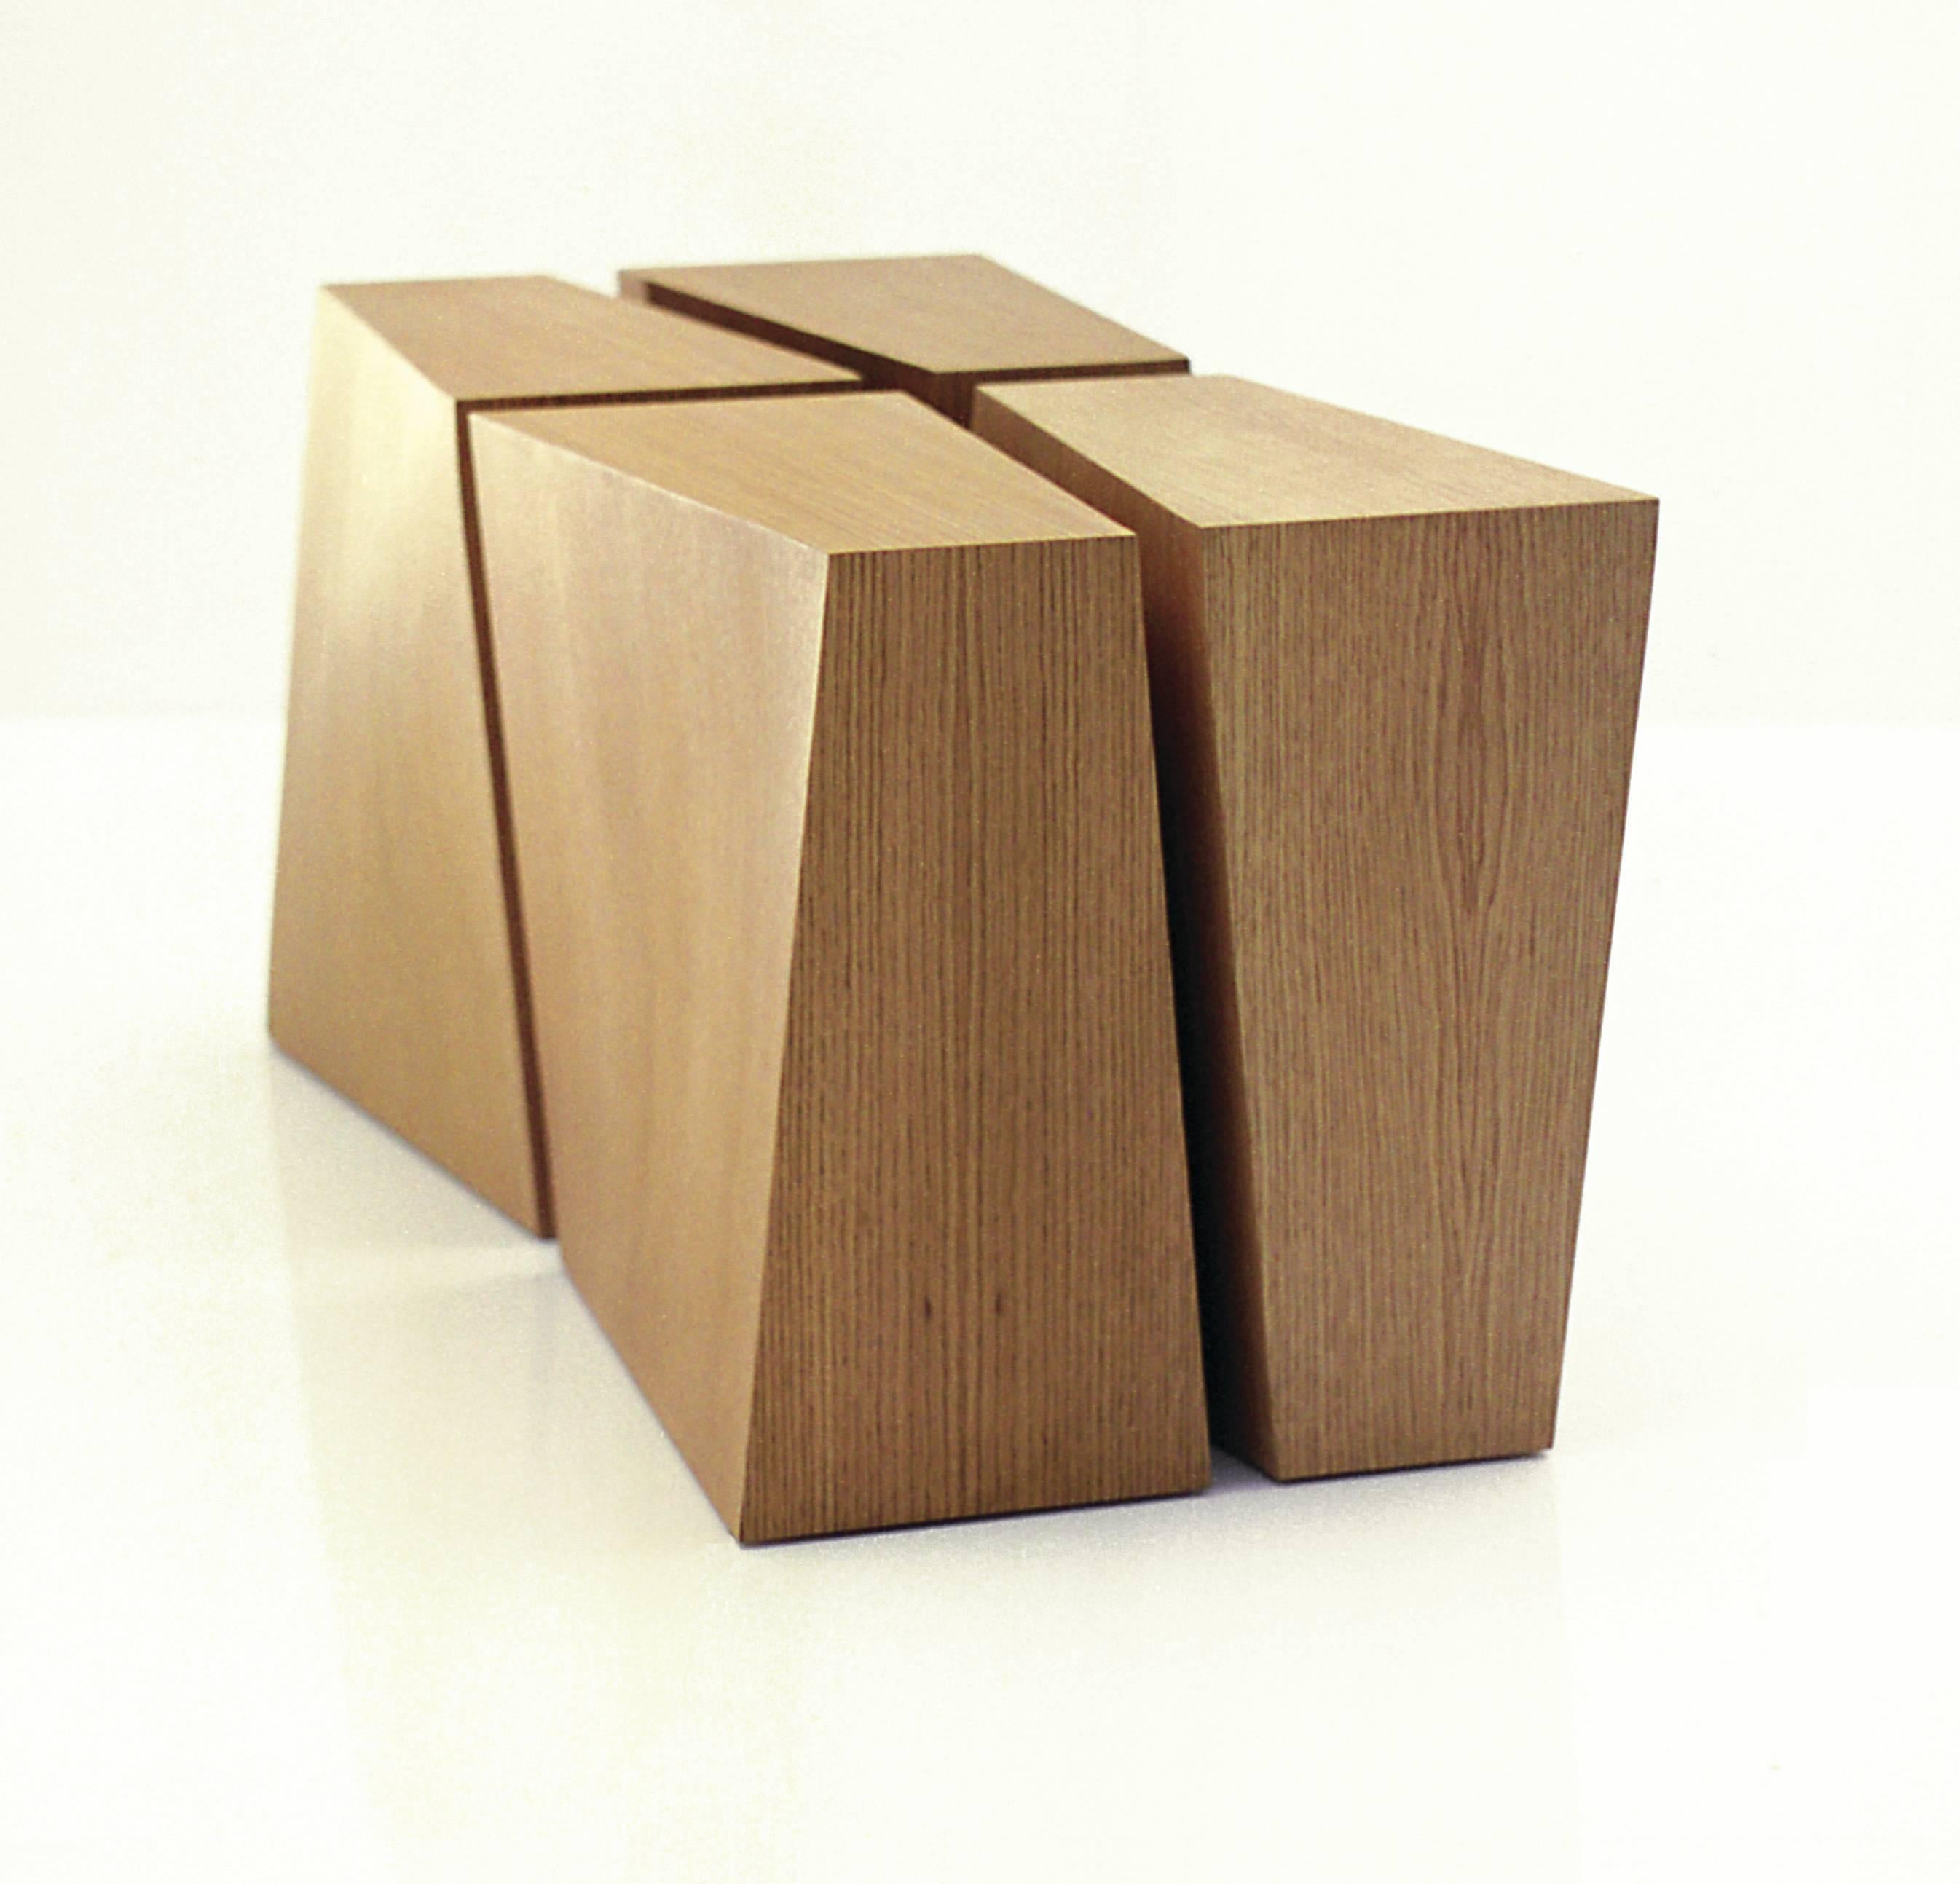 Aan is convex on both sides, Aix is concave.
They make the perfect side table, either alone or in pairs, and also double as extra , portable seating.
Grouped or strung together, they make a bench or cocktail table.
Shown in American rift cut